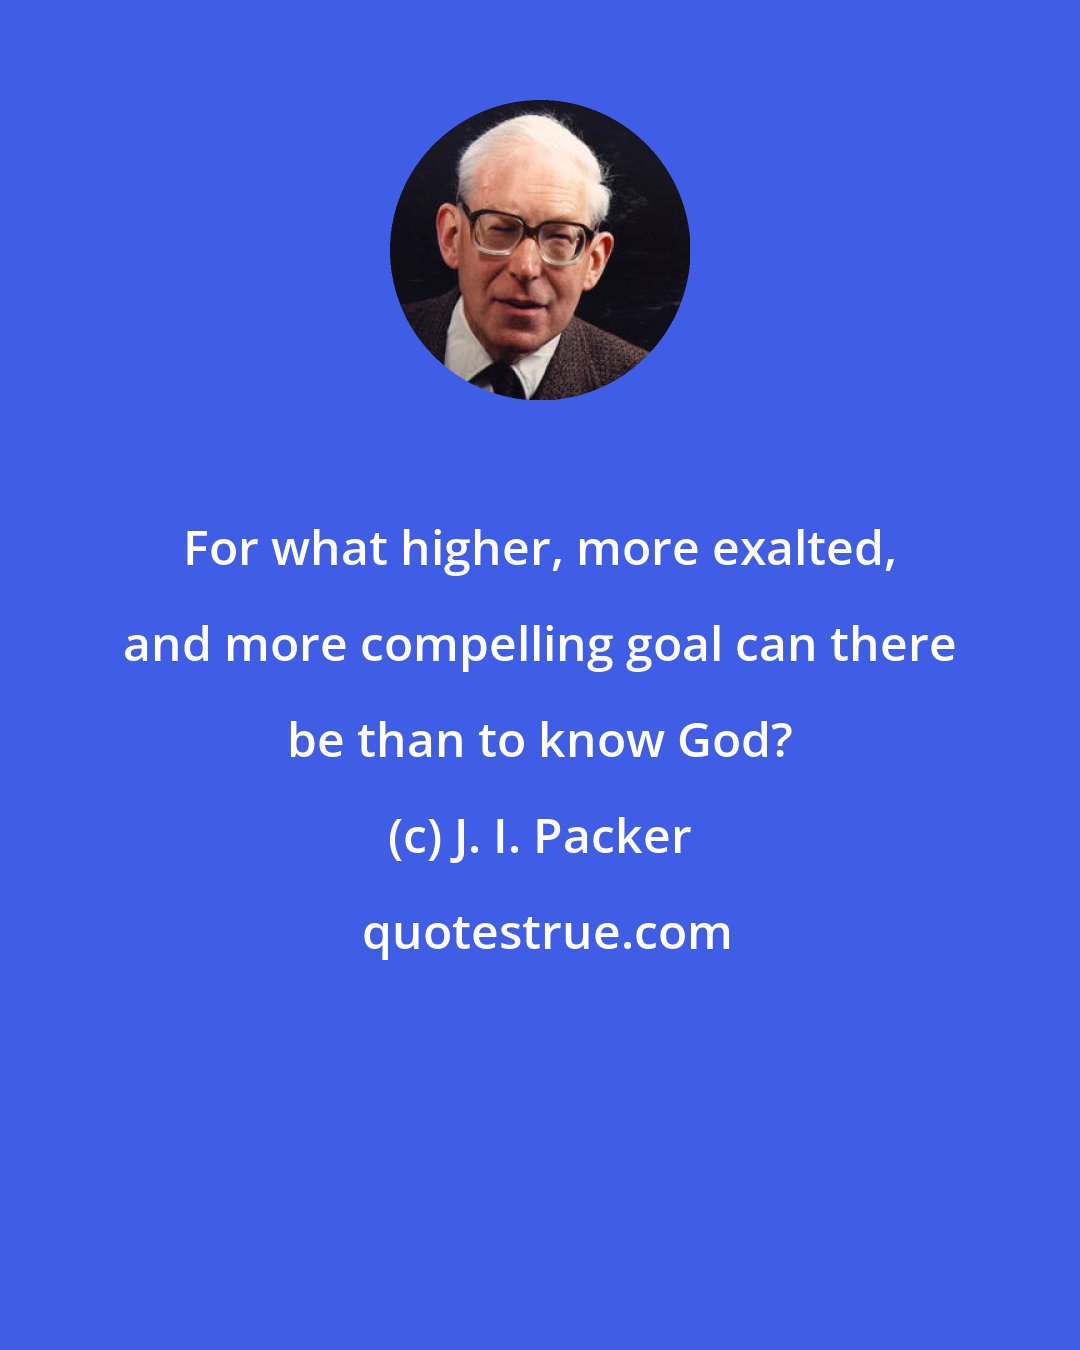 J. I. Packer: For what higher, more exalted, and more compelling goal can there be than to know God?